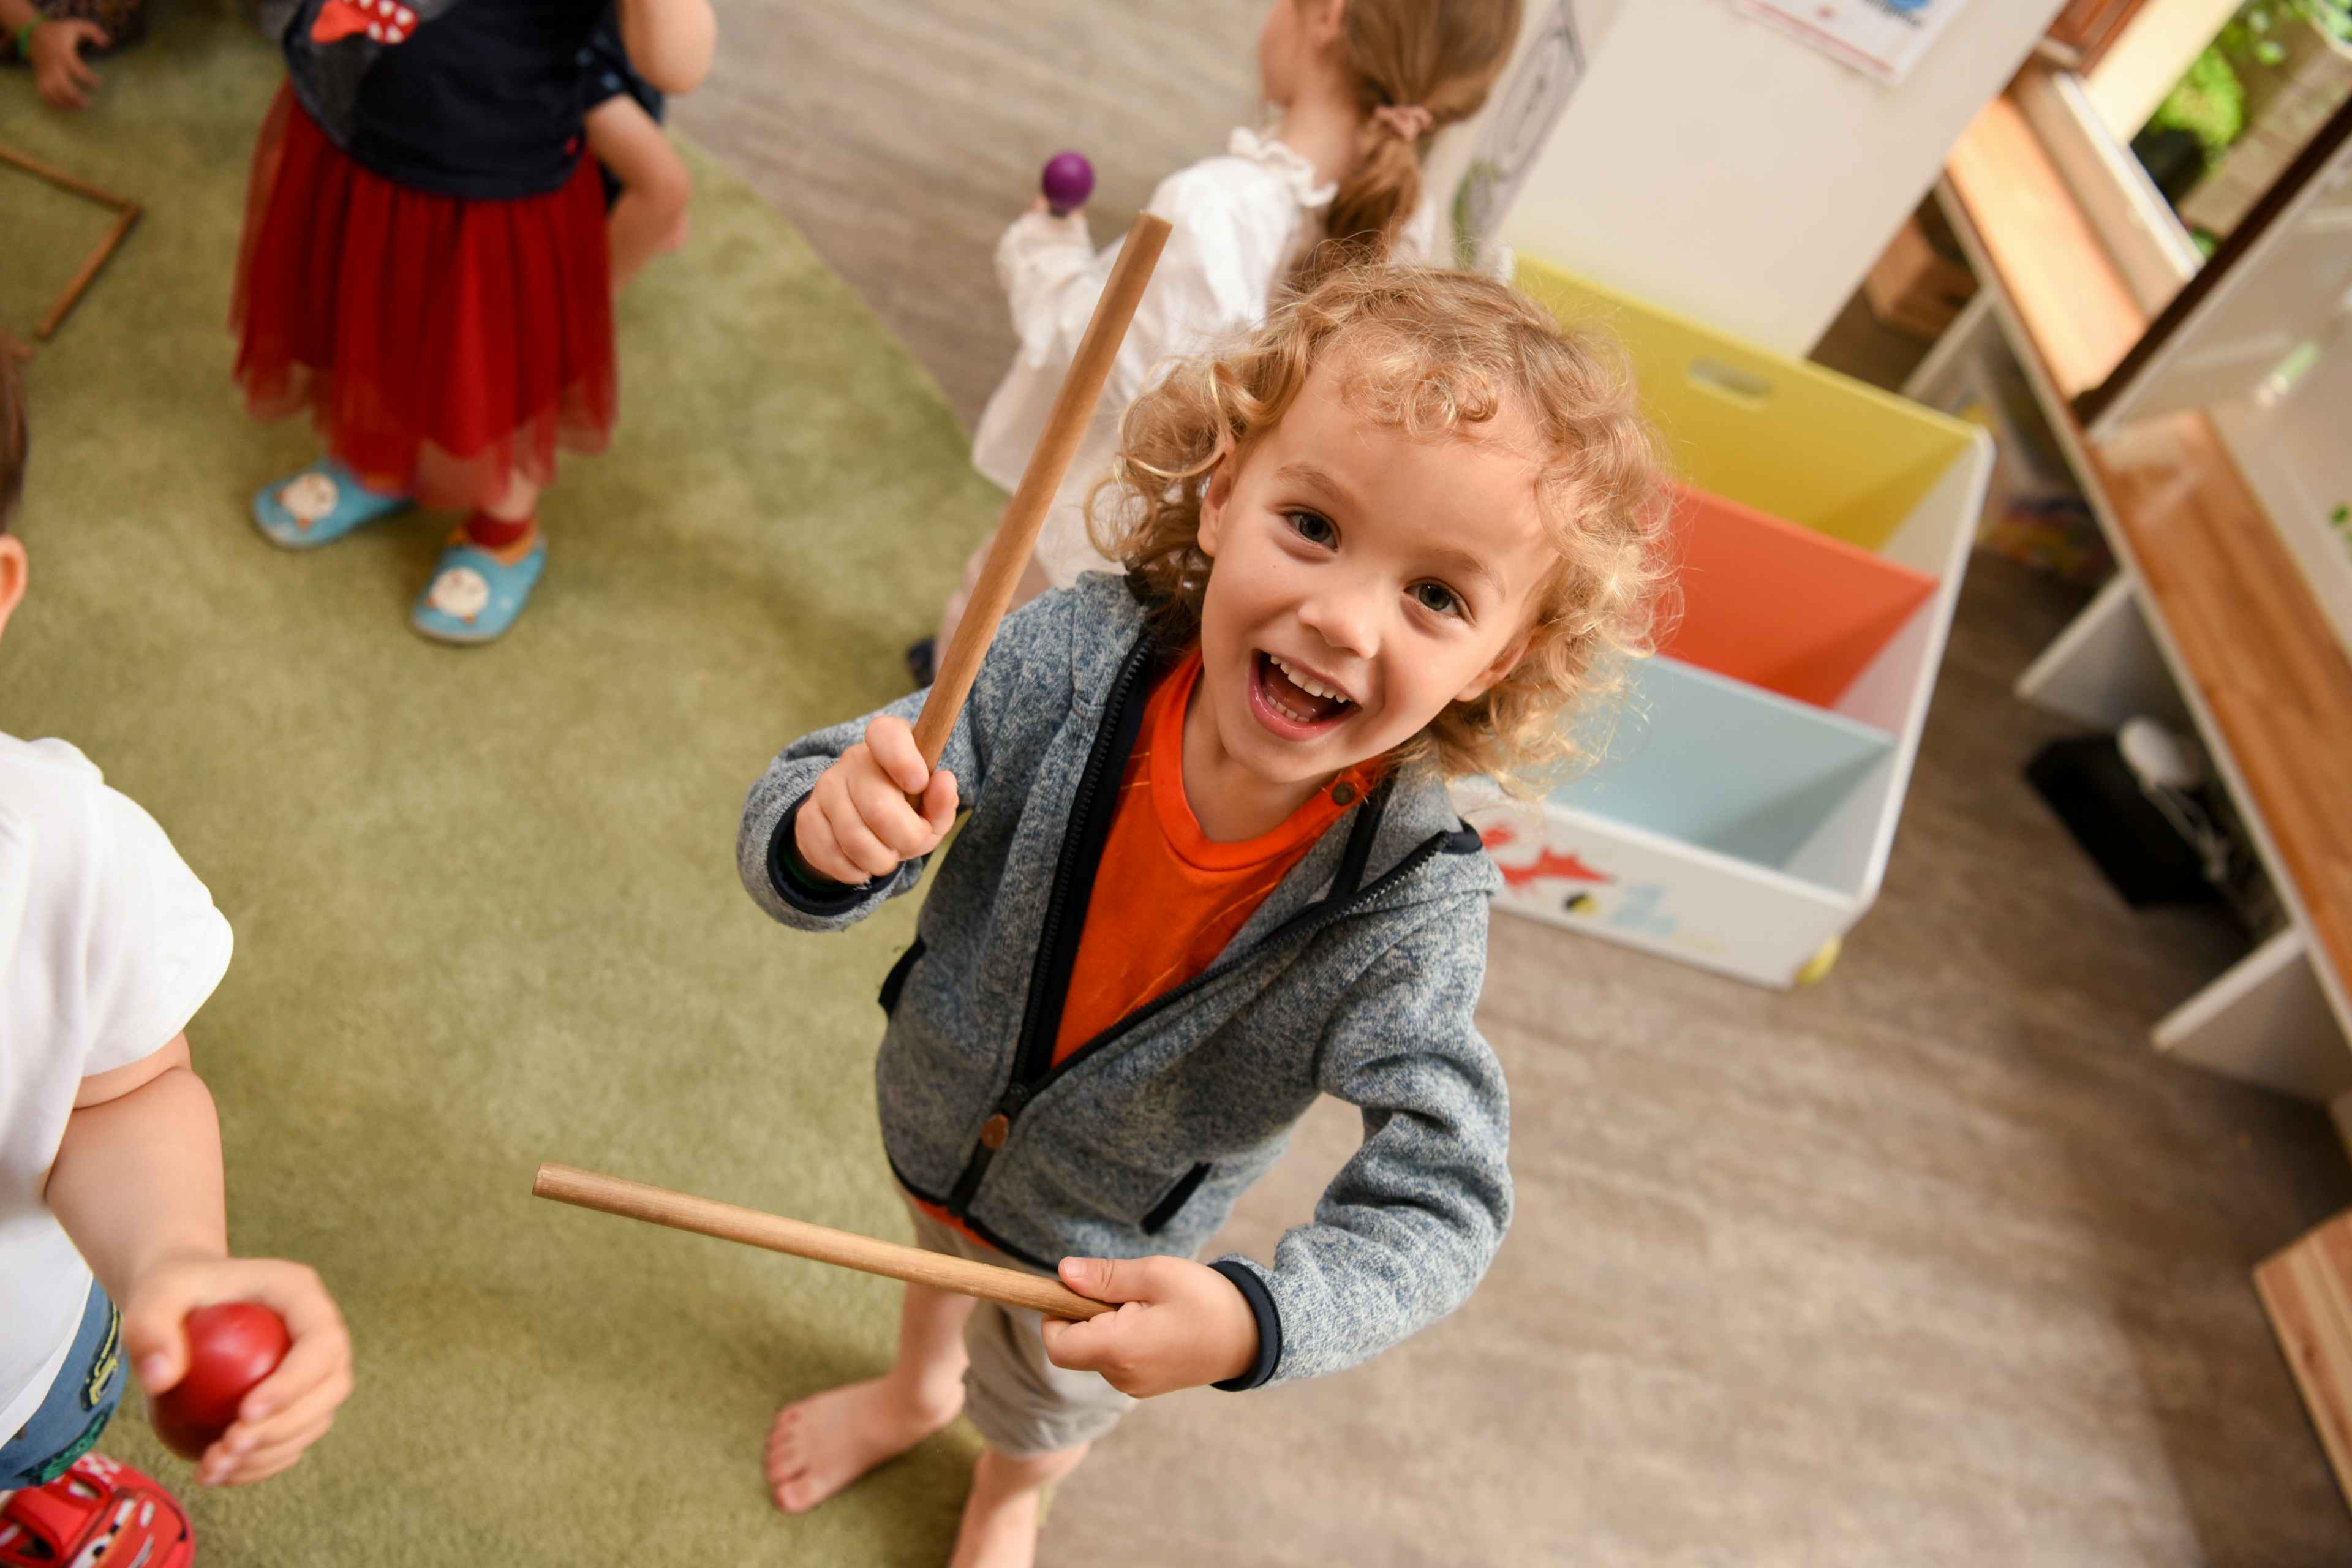 A young student has fun with drumsticks in a classroom